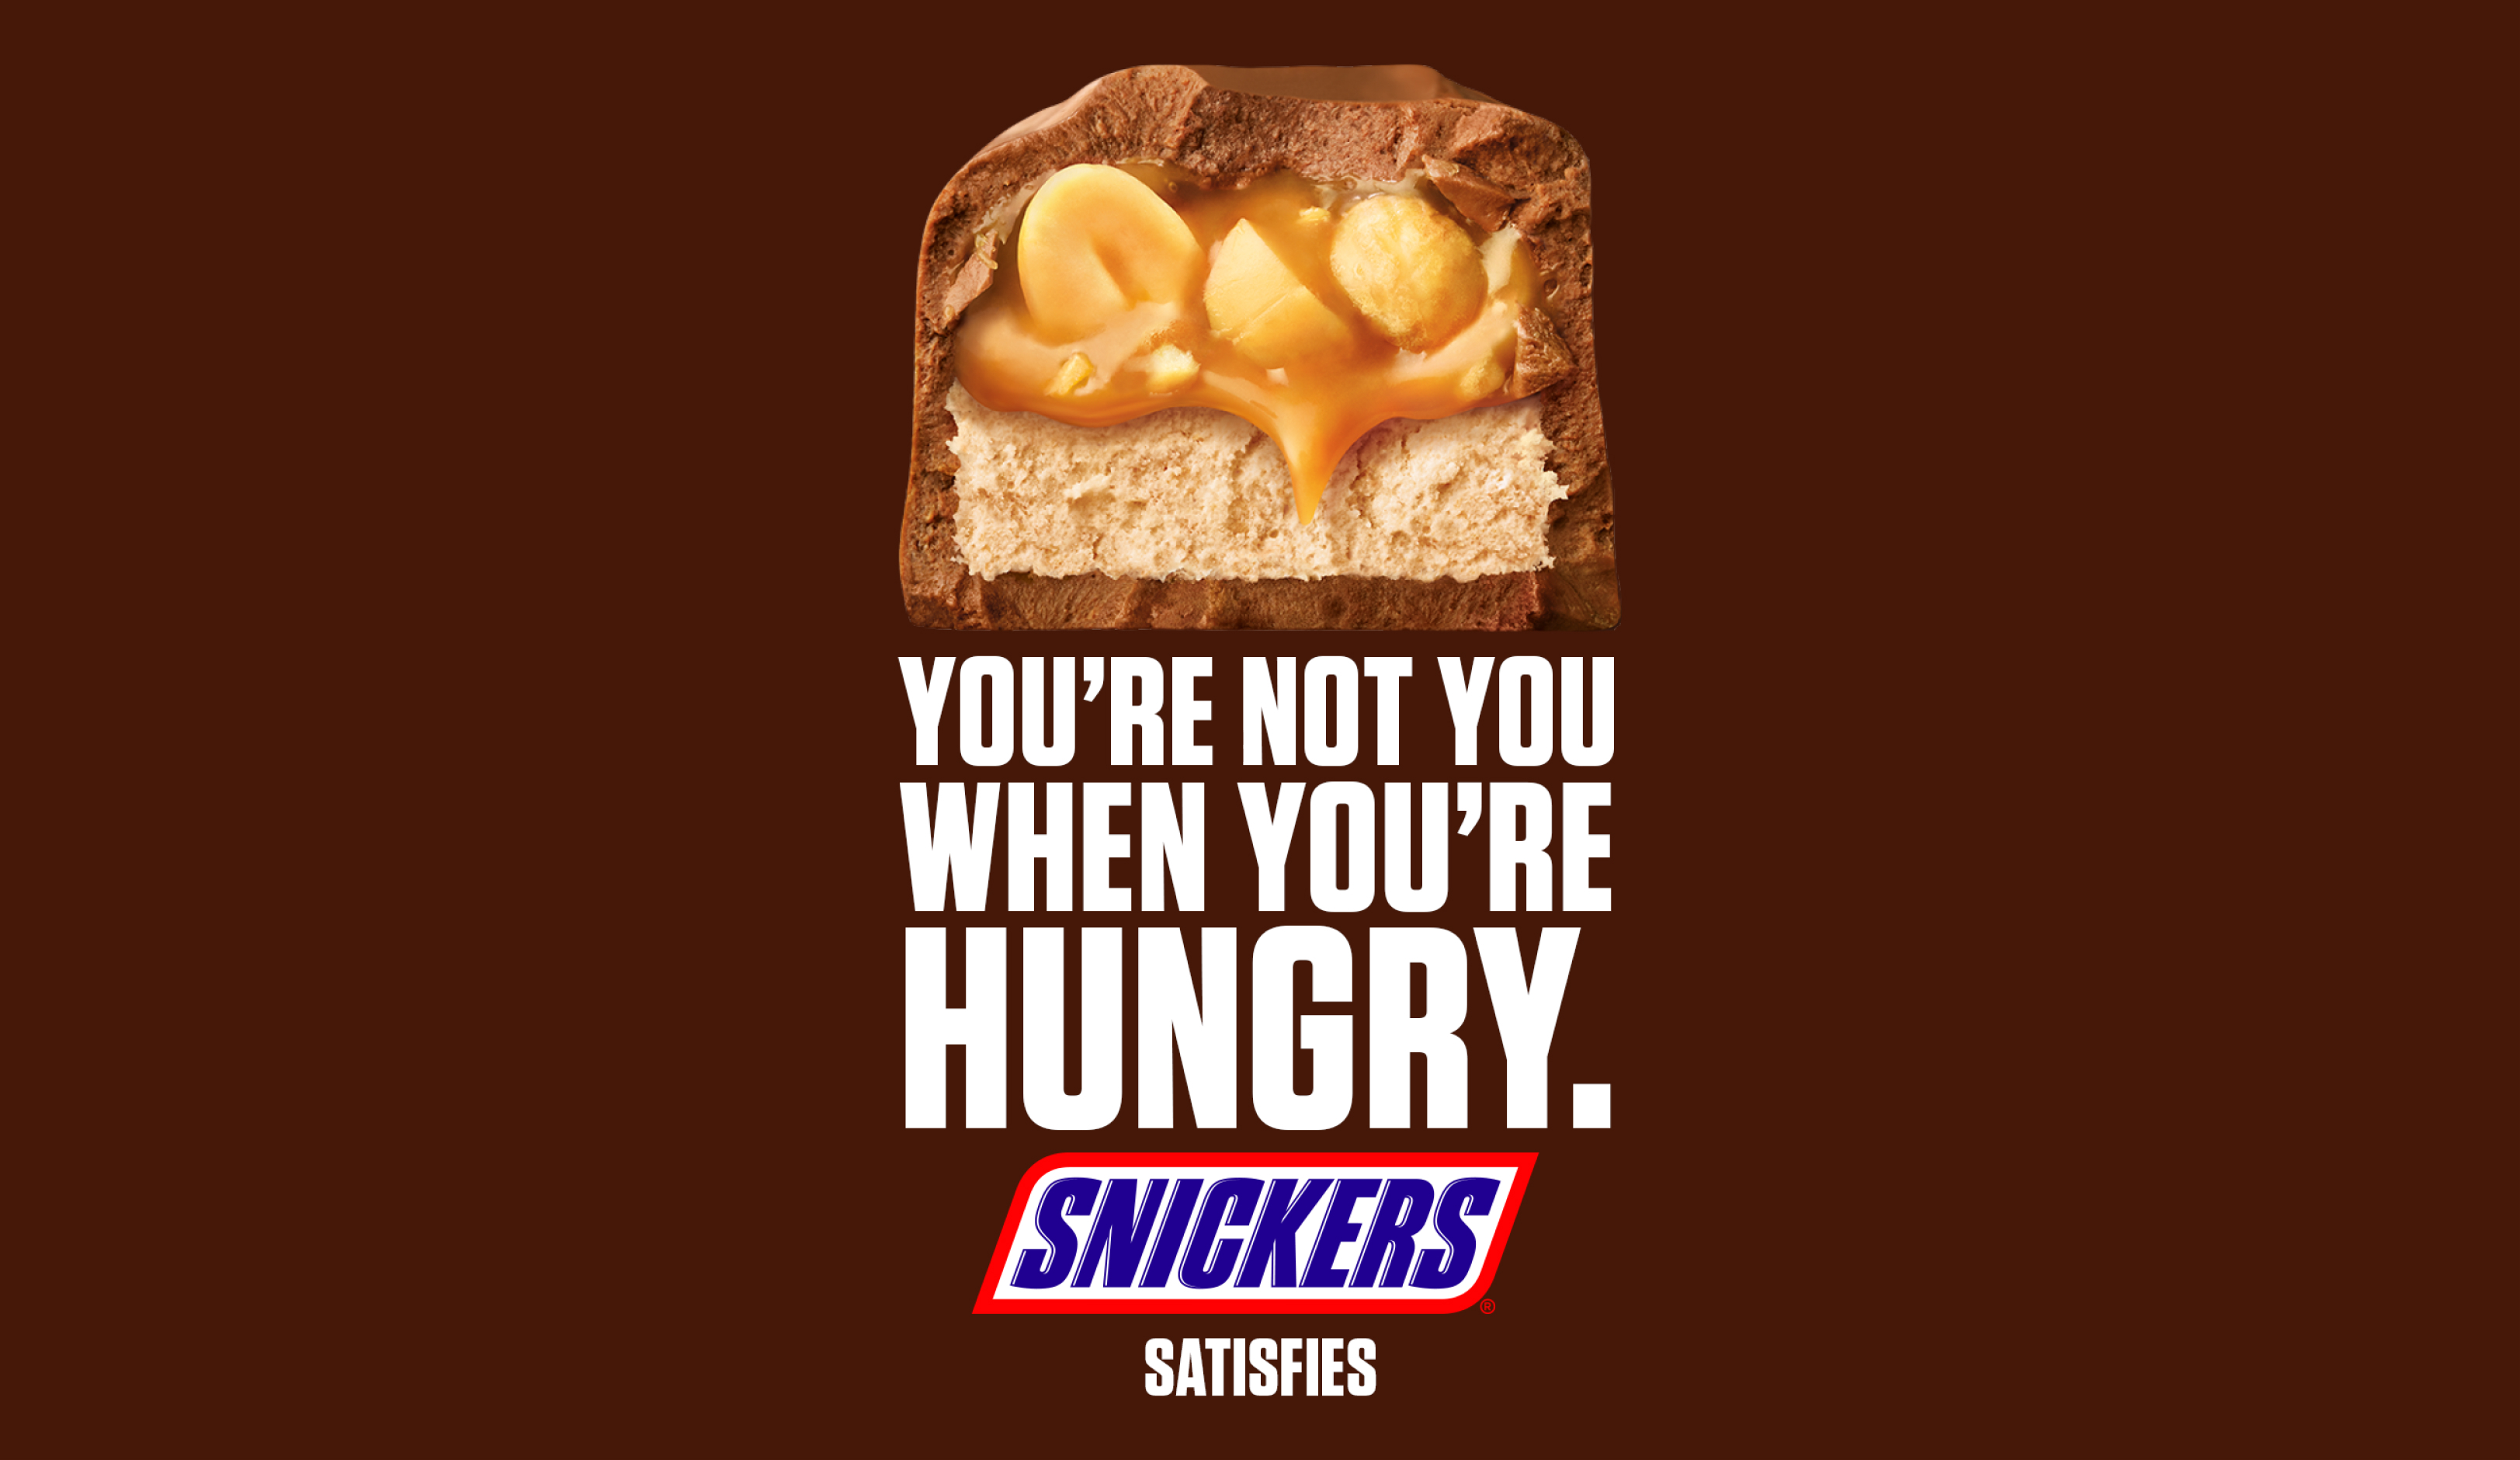 Snickers advertisment introducing the tagline "You're not you when you're hungry"